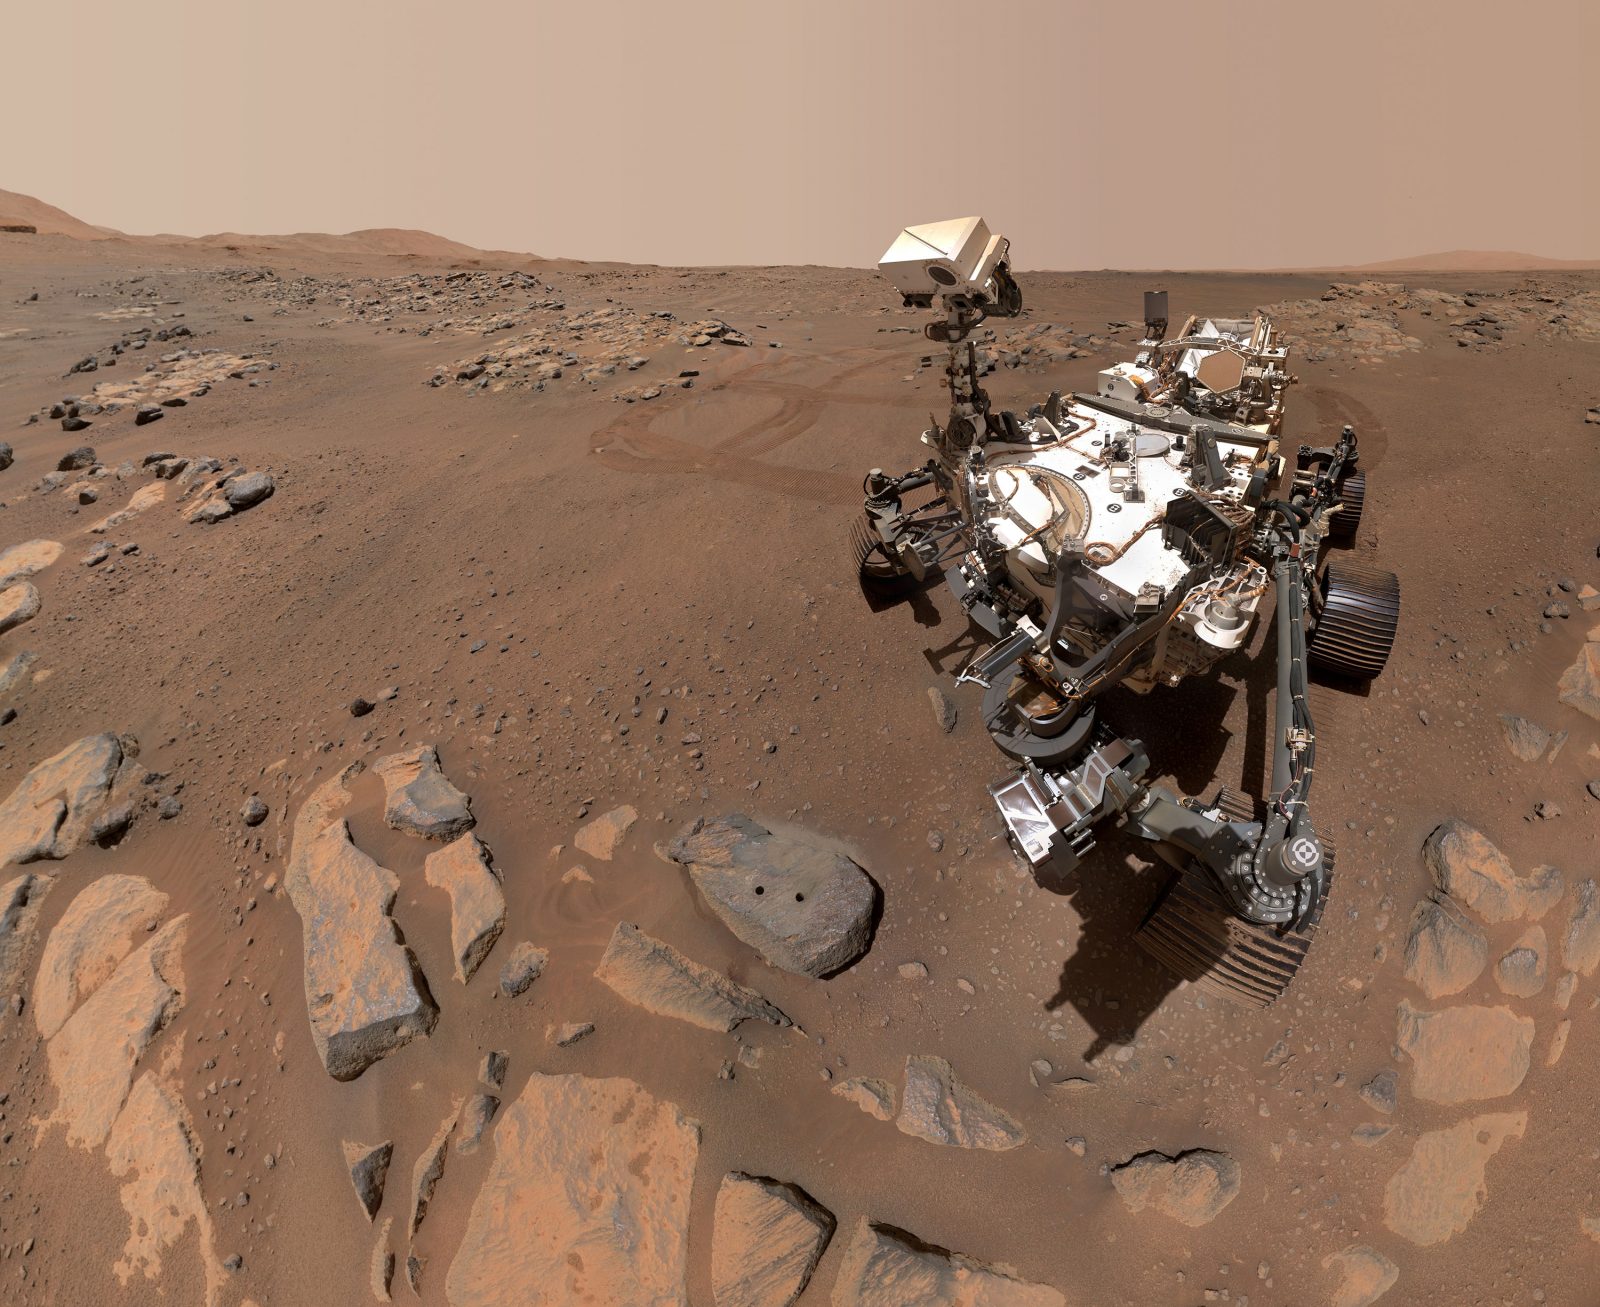 The Mars Perseverance rover on the surface of Mars, a red dusty looking terrain.